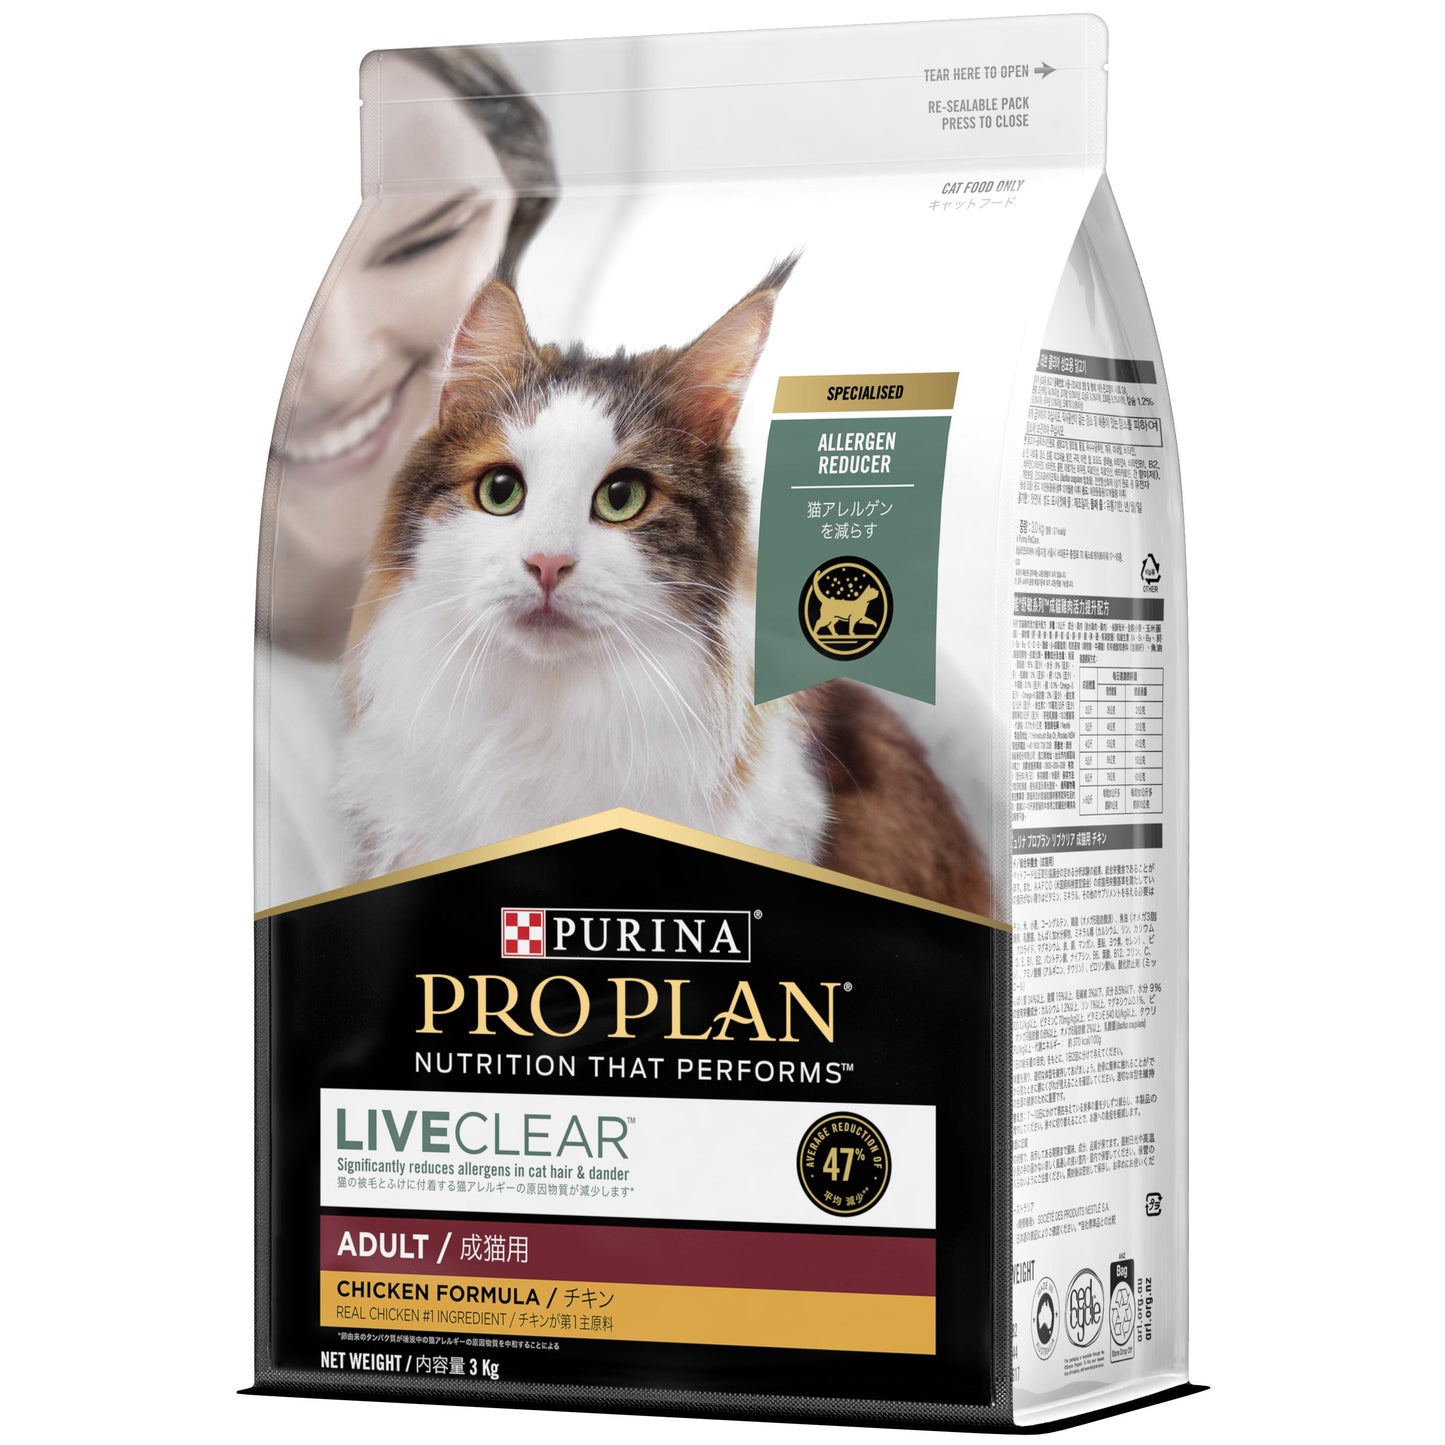 Pro Plan Live Clear Adult Chicken Cat Food